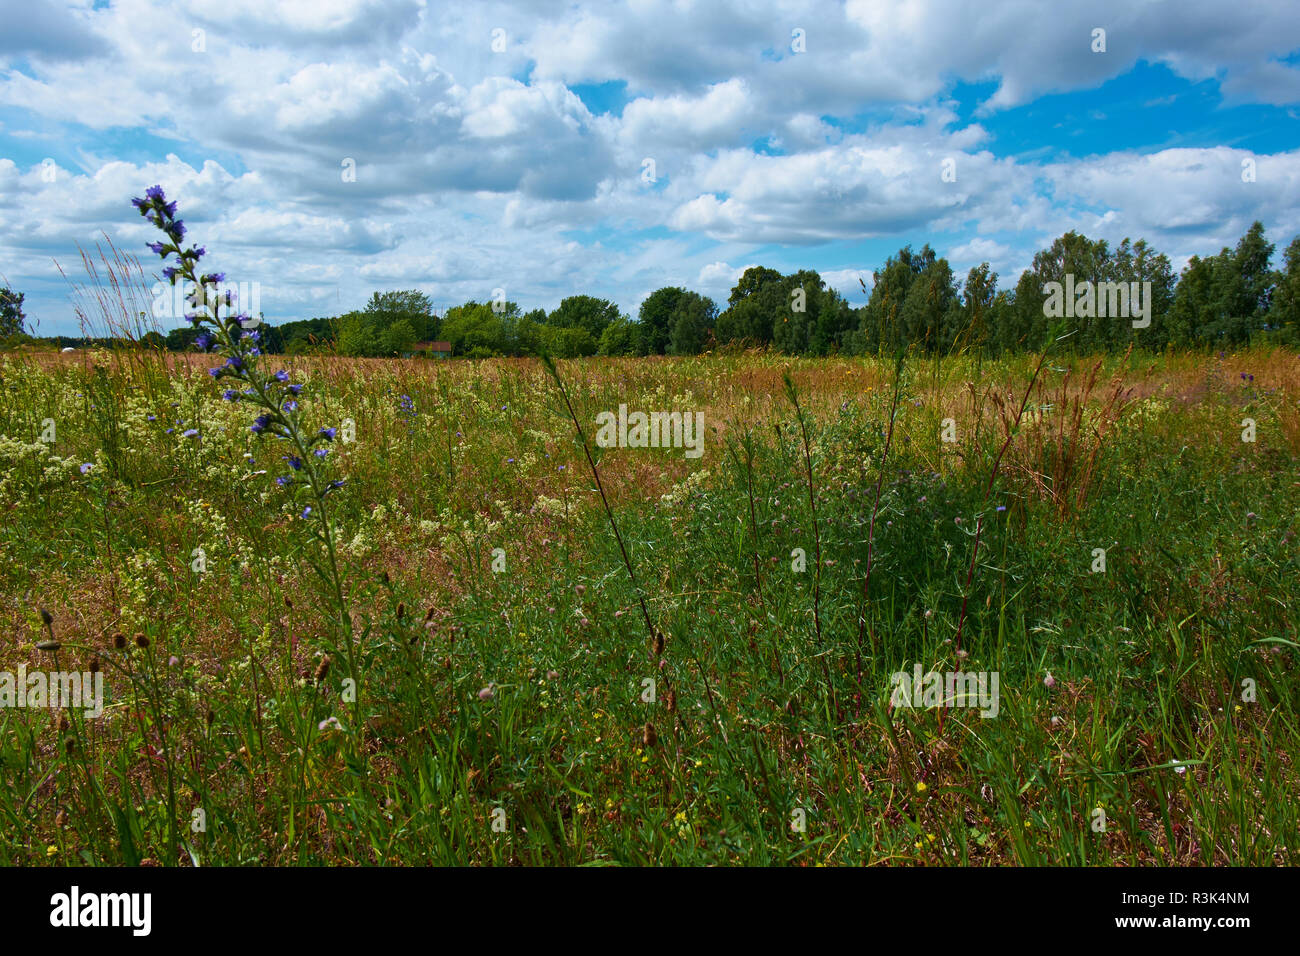 impressions from the field corridor in mecklenburg-vorpommern,germany Stock Photo